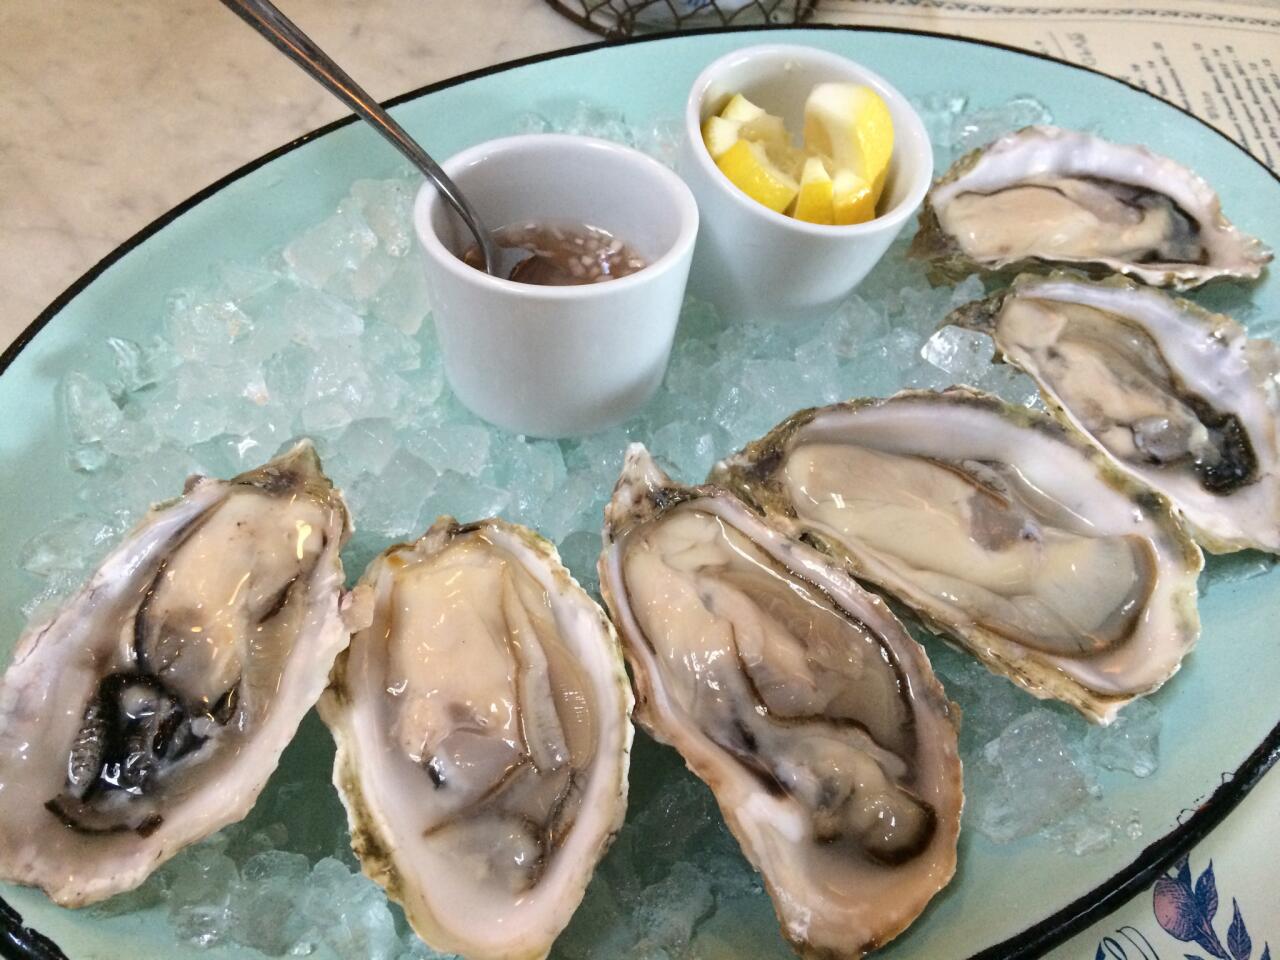 Fresh oysters on the happy hour menu at Harlowe.